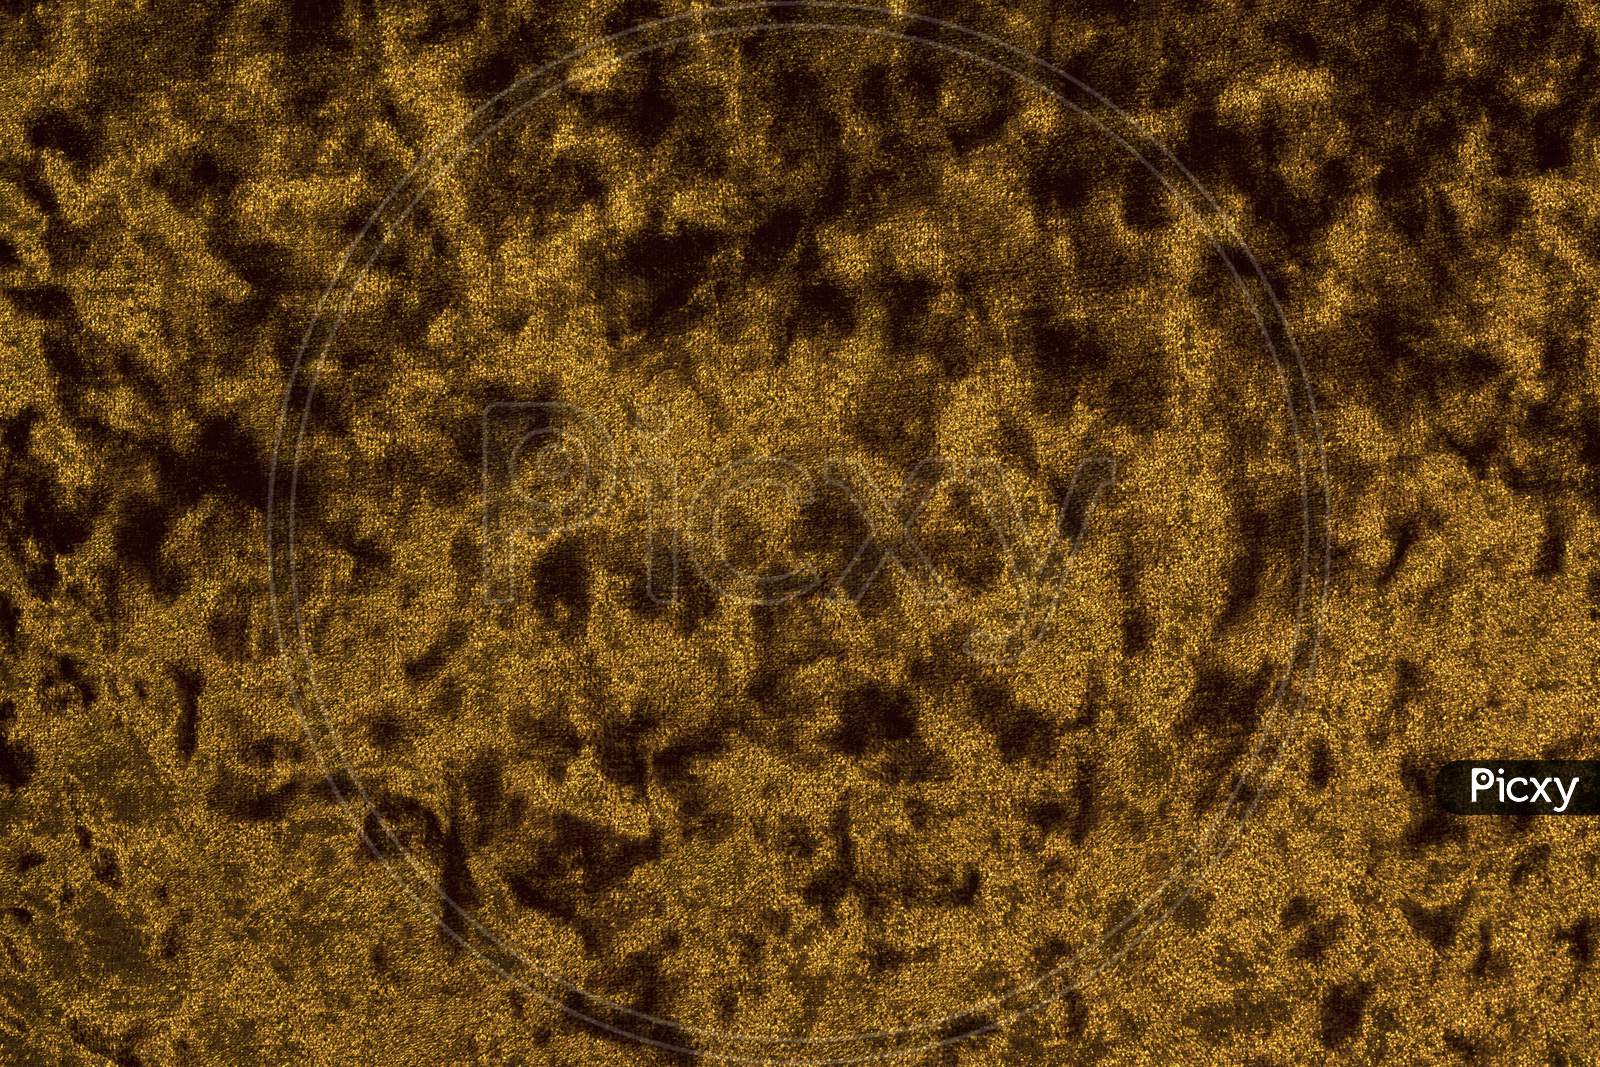 Highly Detailed Texture Of Golden Brown Yellow Velour Cloth.